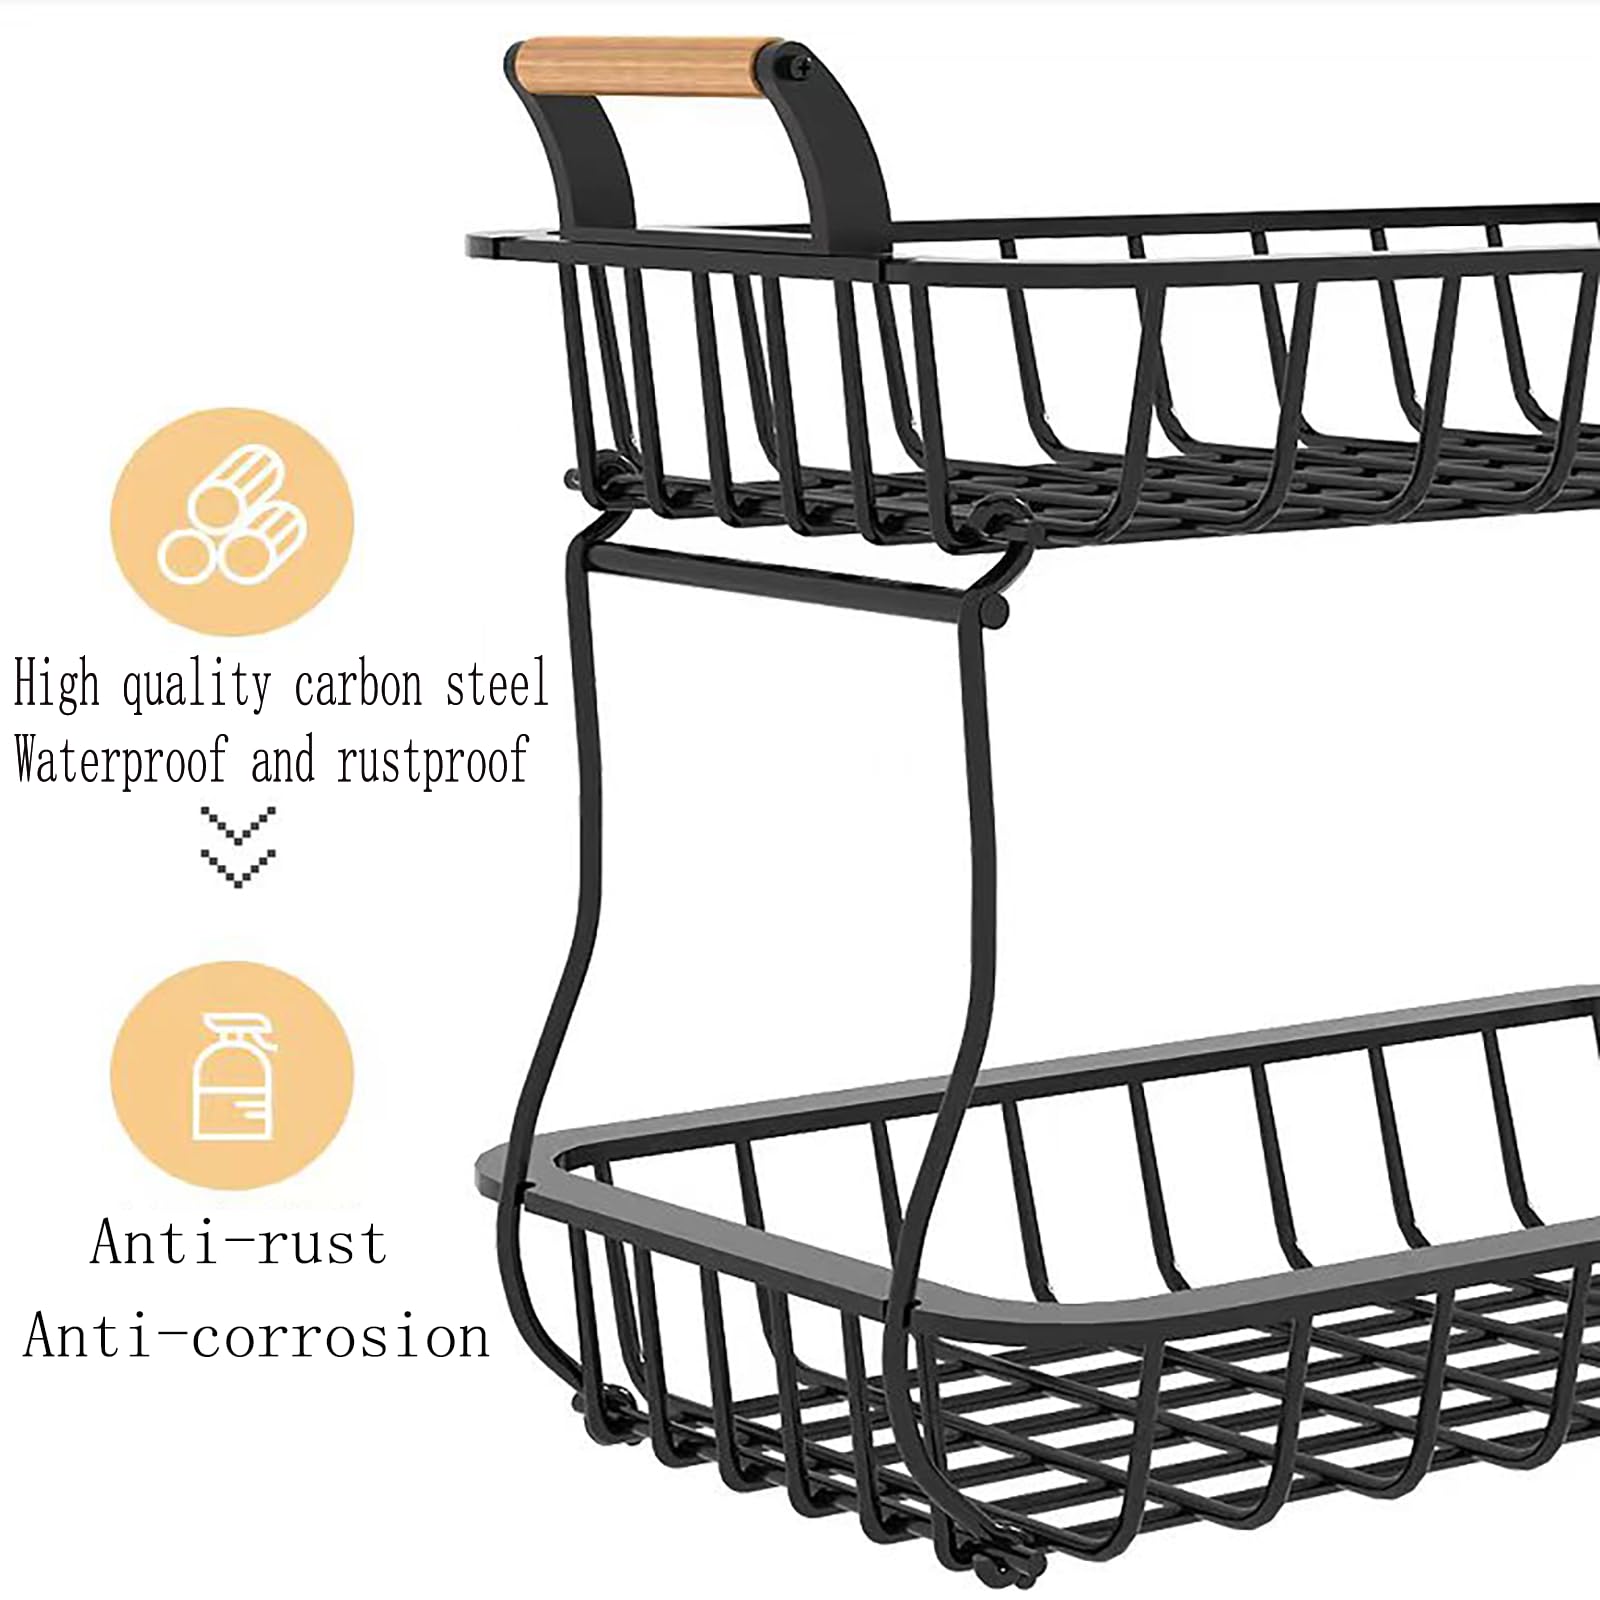 MECUHQP 2 Tier Fruit Vegetables Basket Bowl, Kitchen Counter Metal Wire Storage Basket Fruits Stand Holder Organizer for Bread Snack Veggies Produce